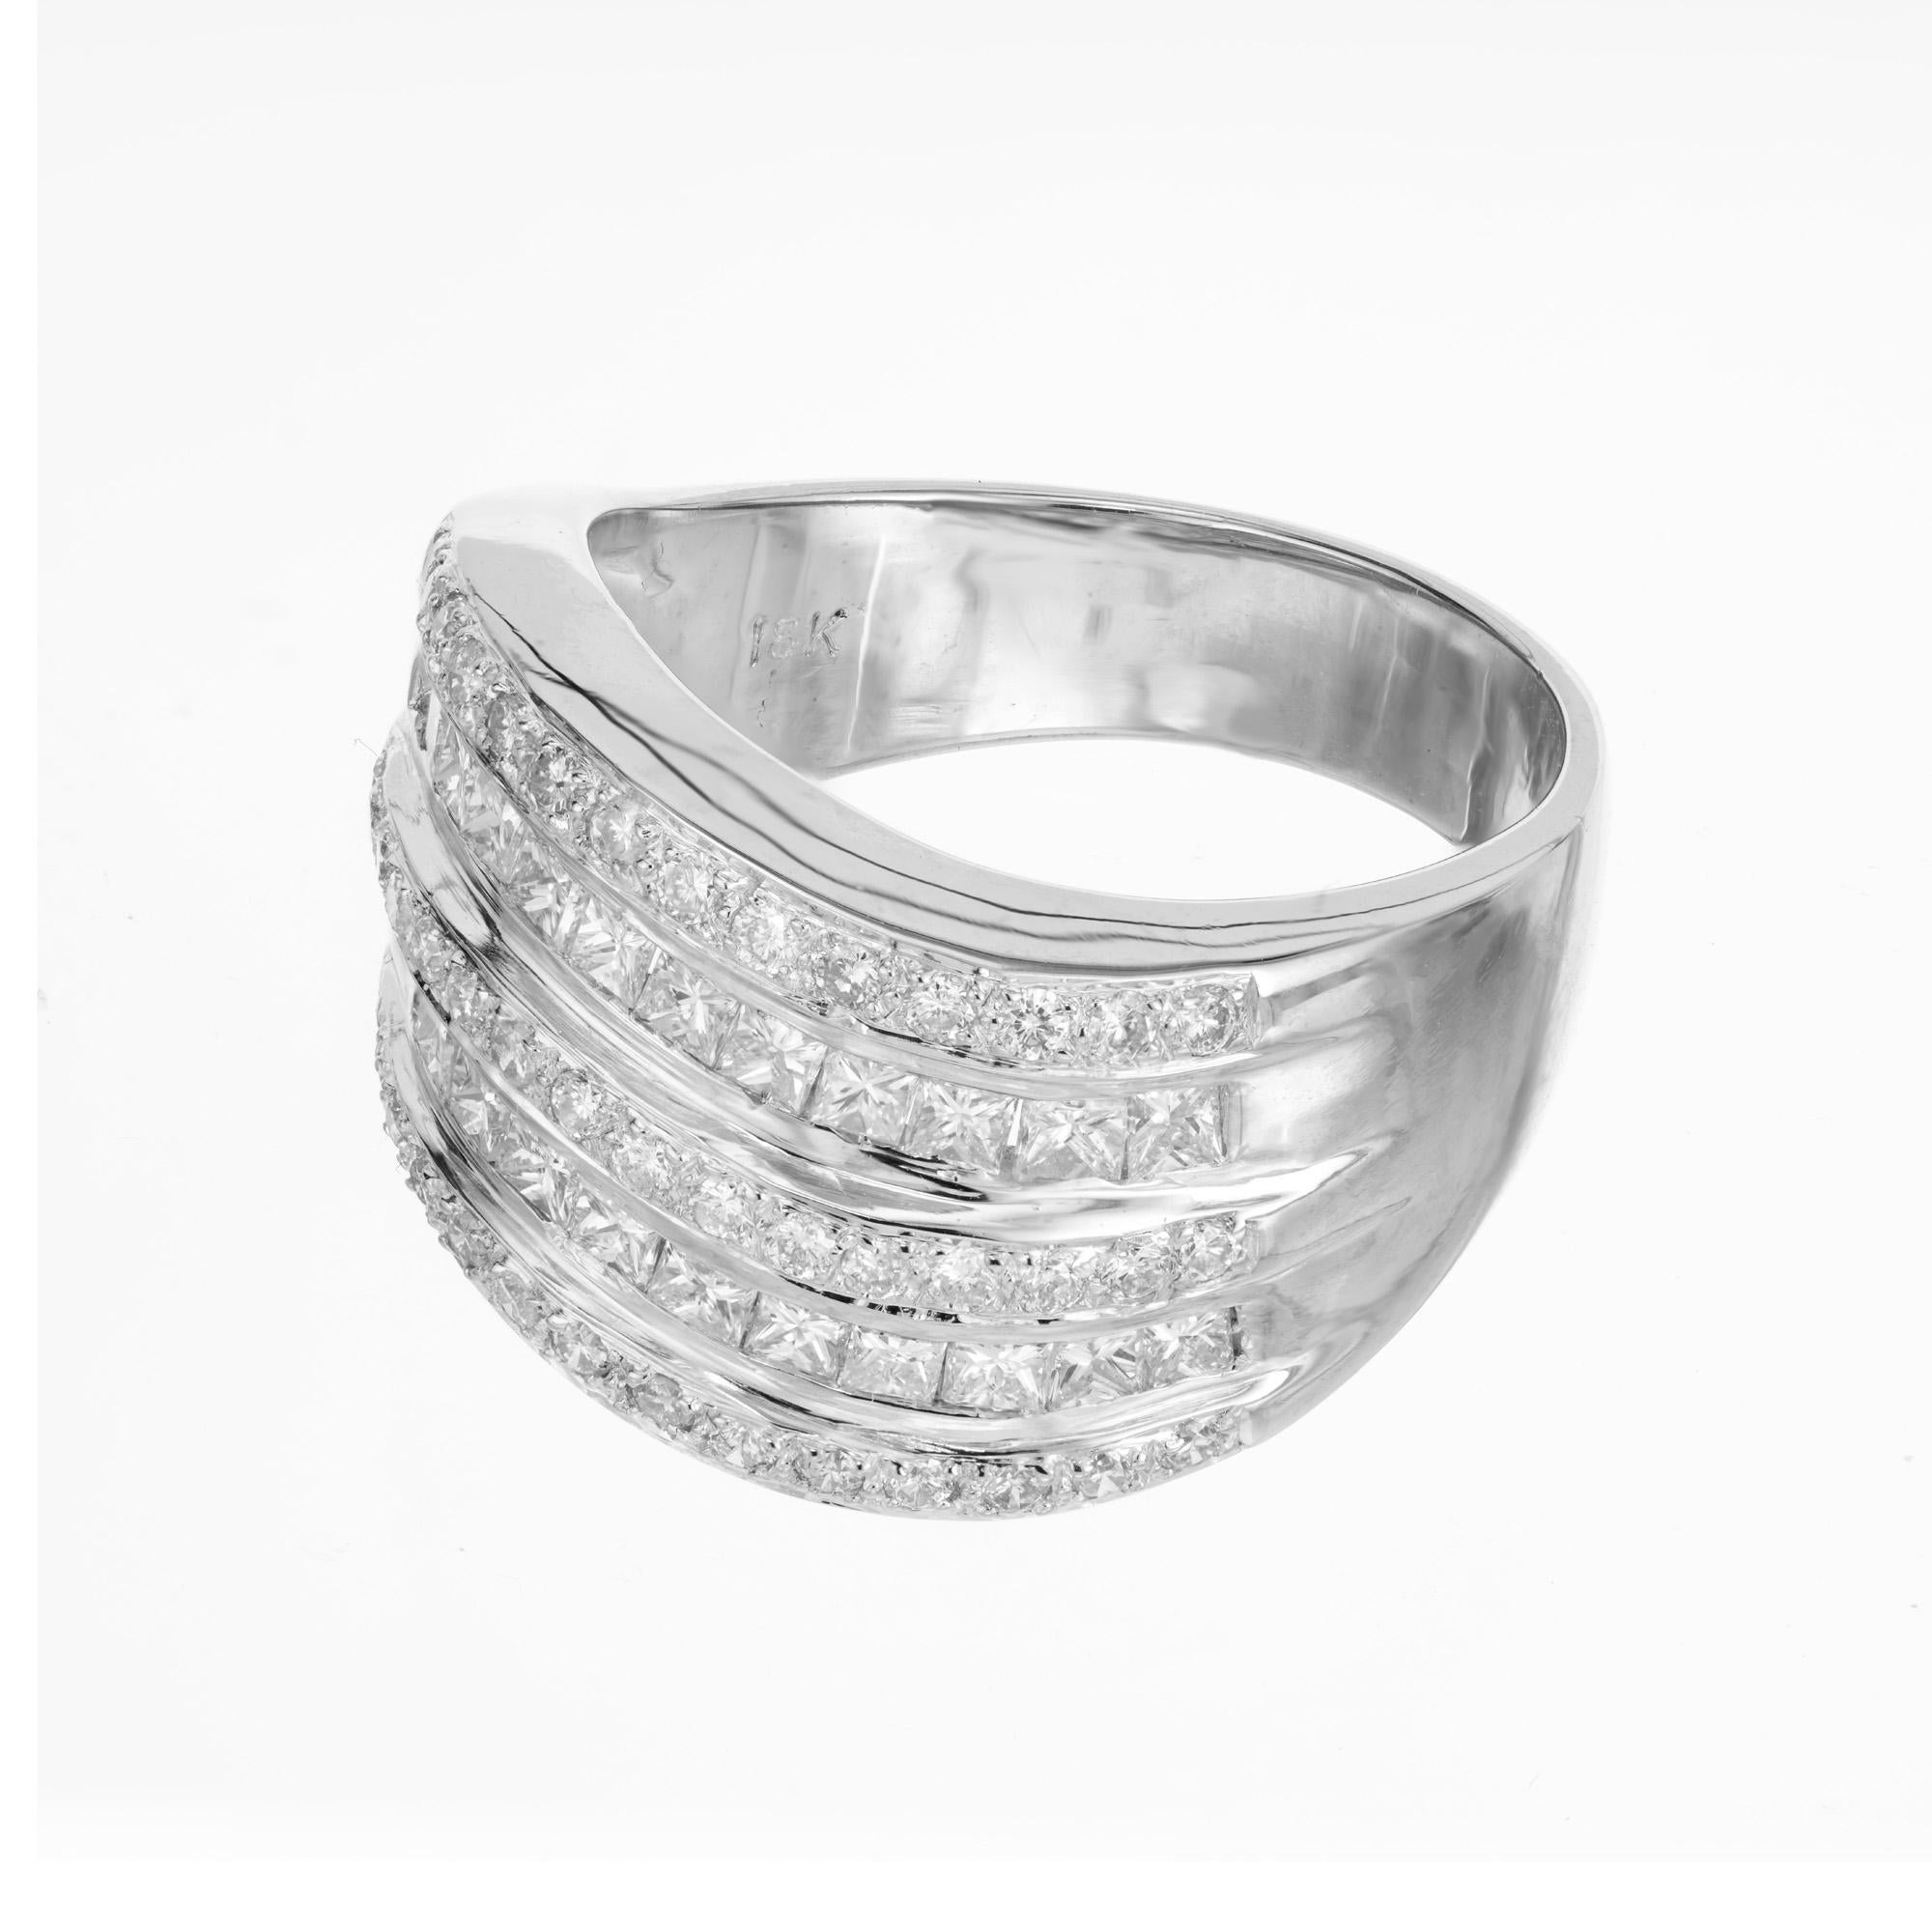 Round Cut 1.50 Carat Diamond White Gold Five Row Wide Swirl Cocktail Ring For Sale